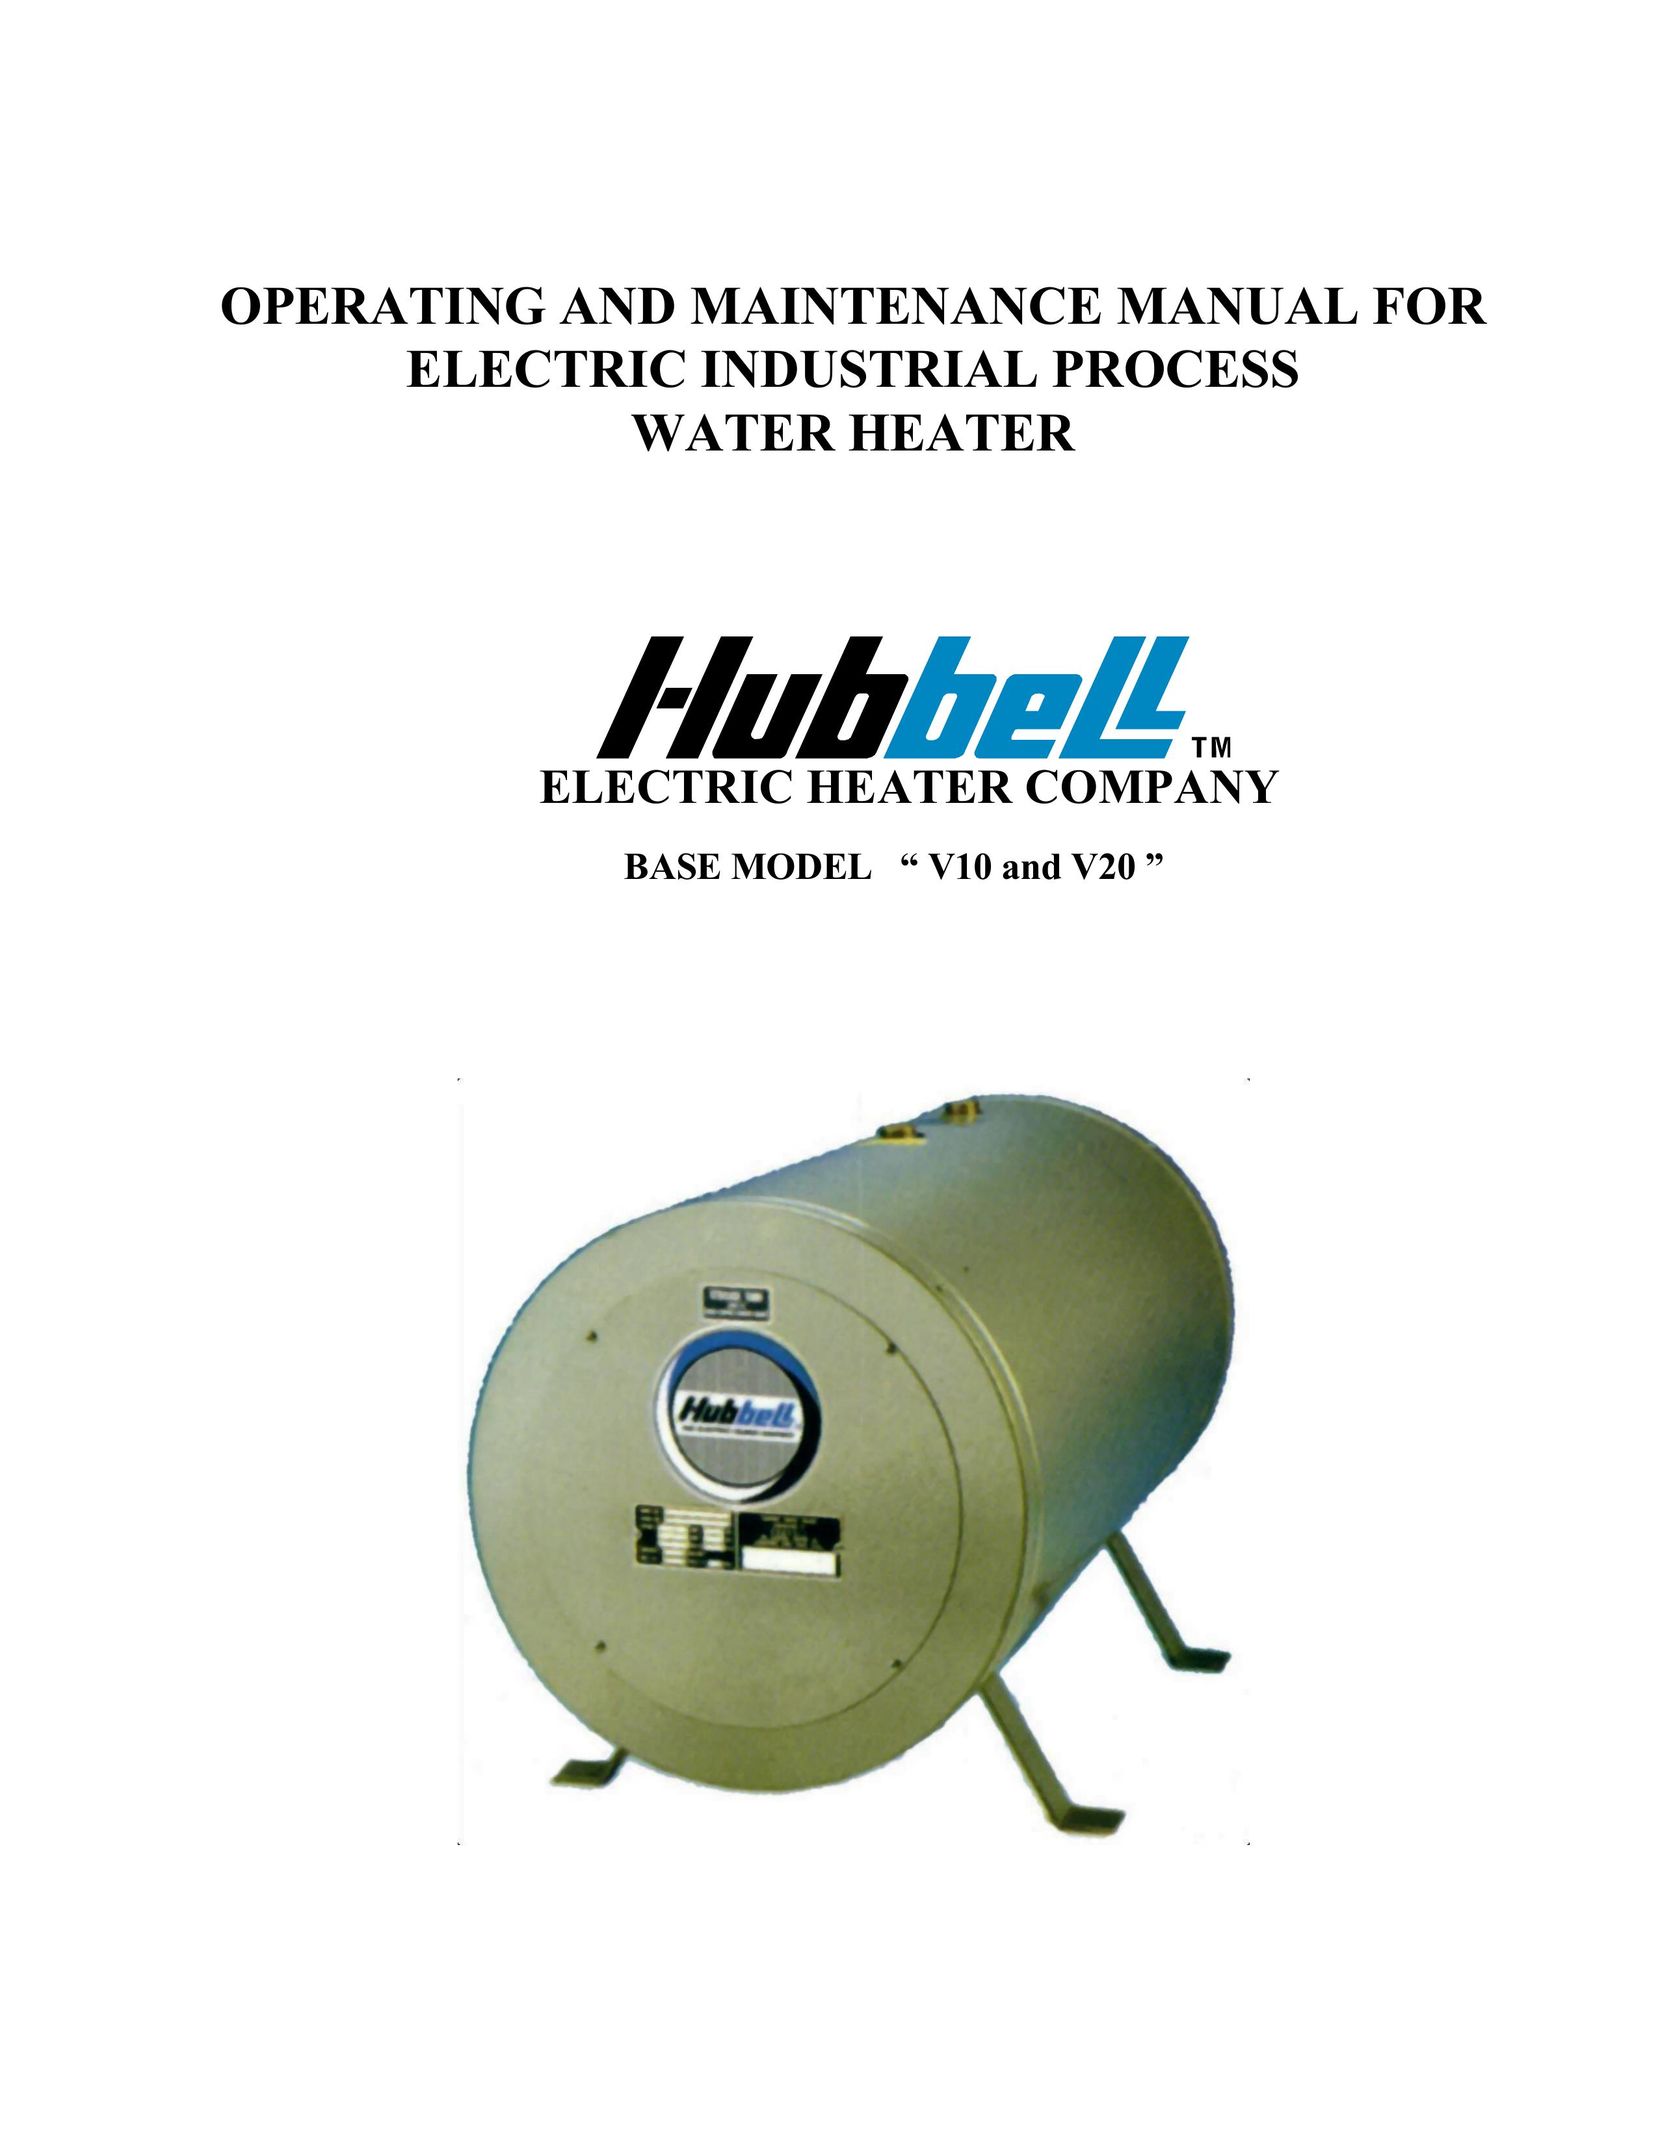 Hubbell Electric Heater Company V10 Water Heater User Manual